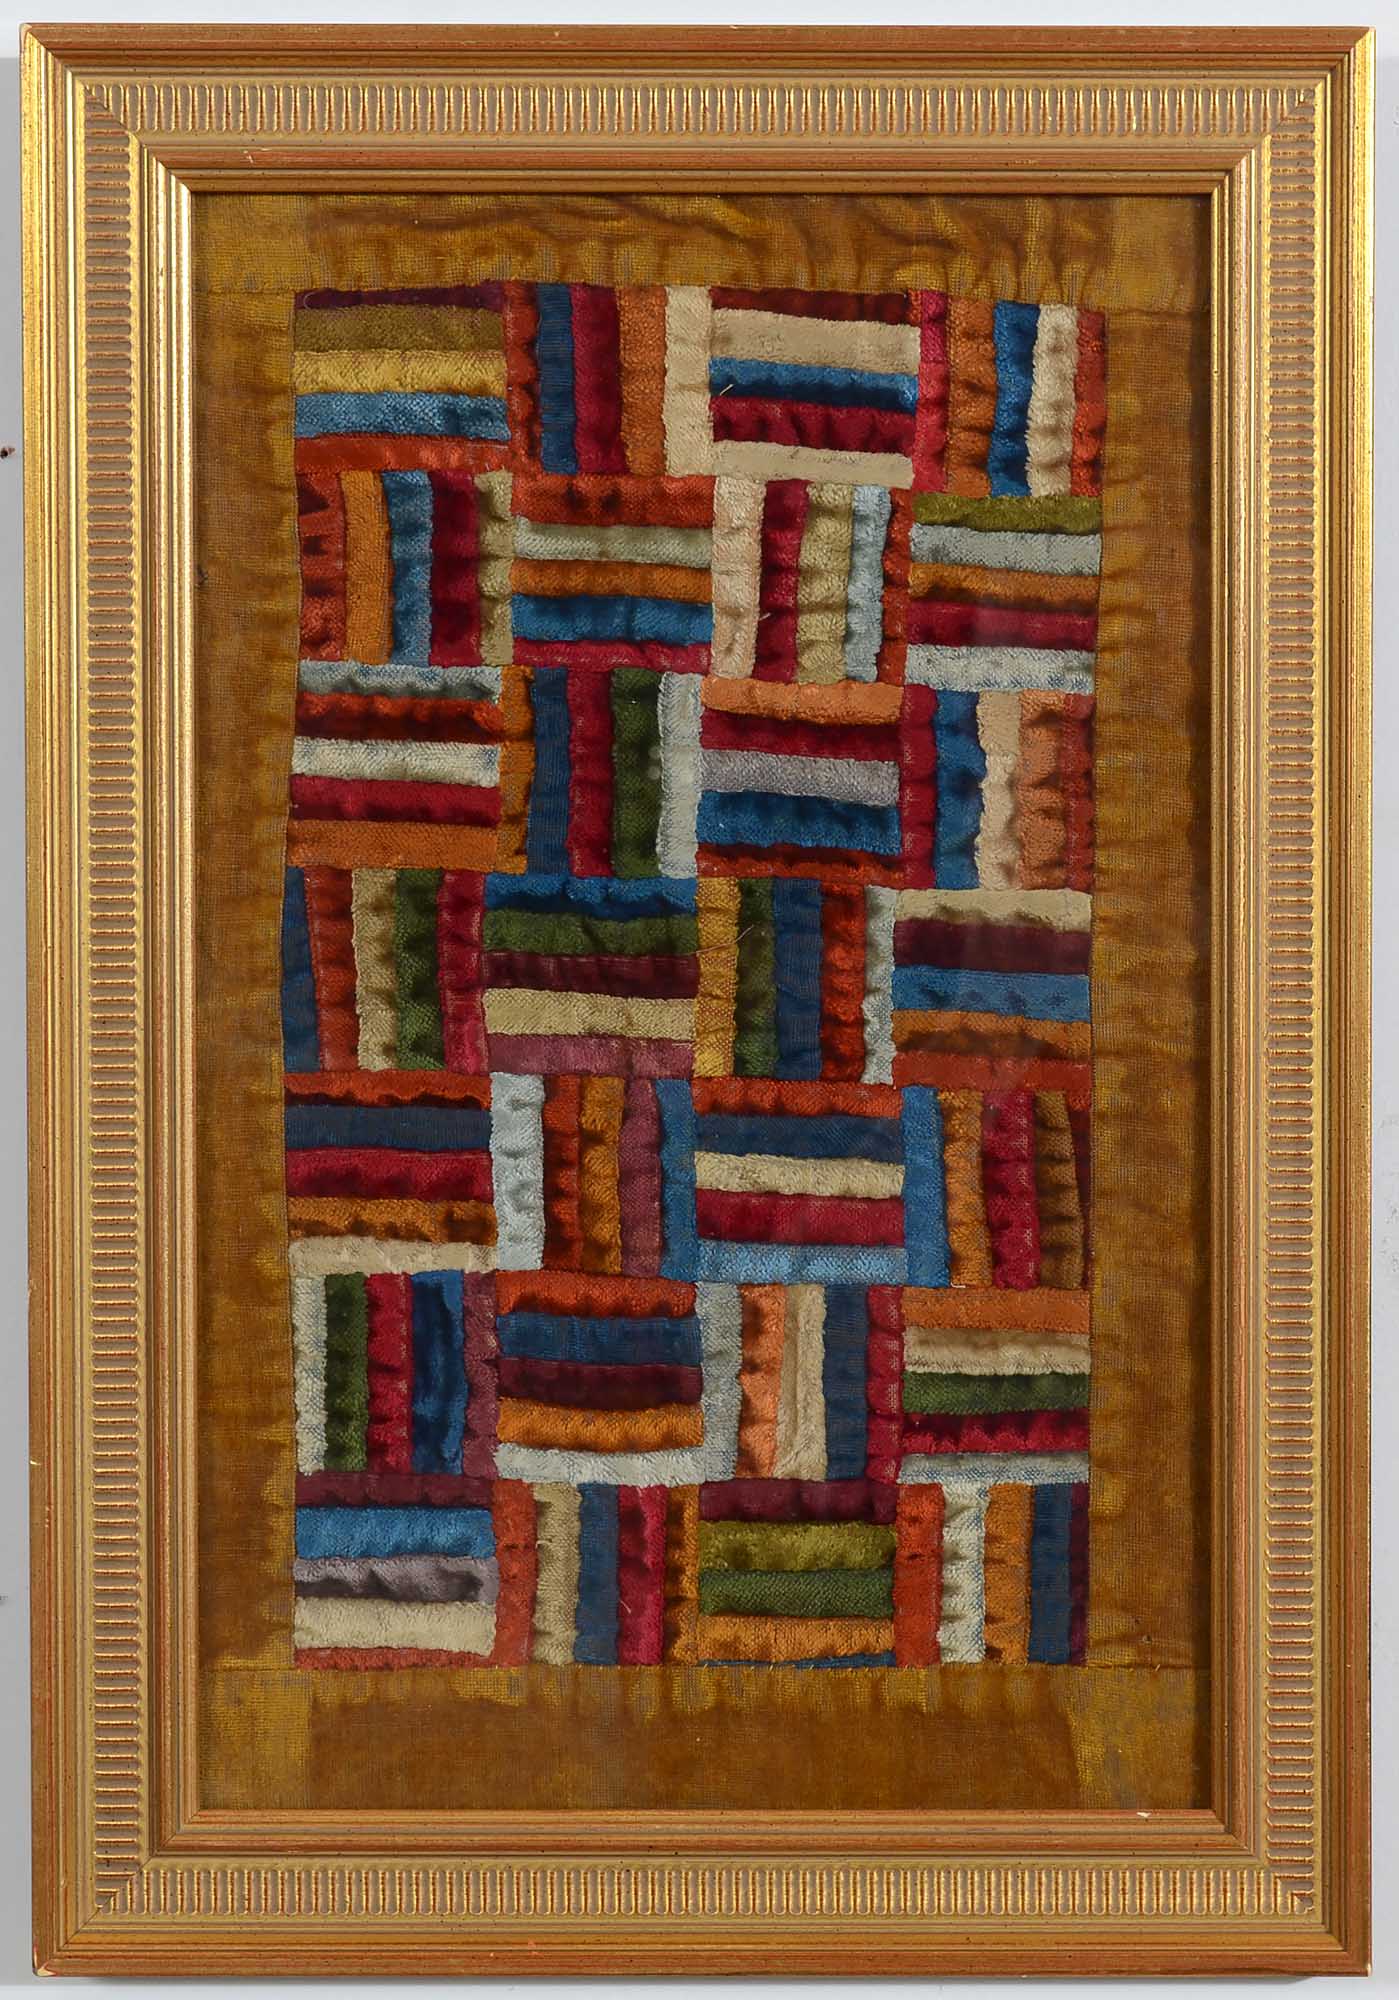 Fence Rail Log Cabin doll quilt made of richly colored plush velvets in a gold leaf frame measuring 13 3/4" x 20". 